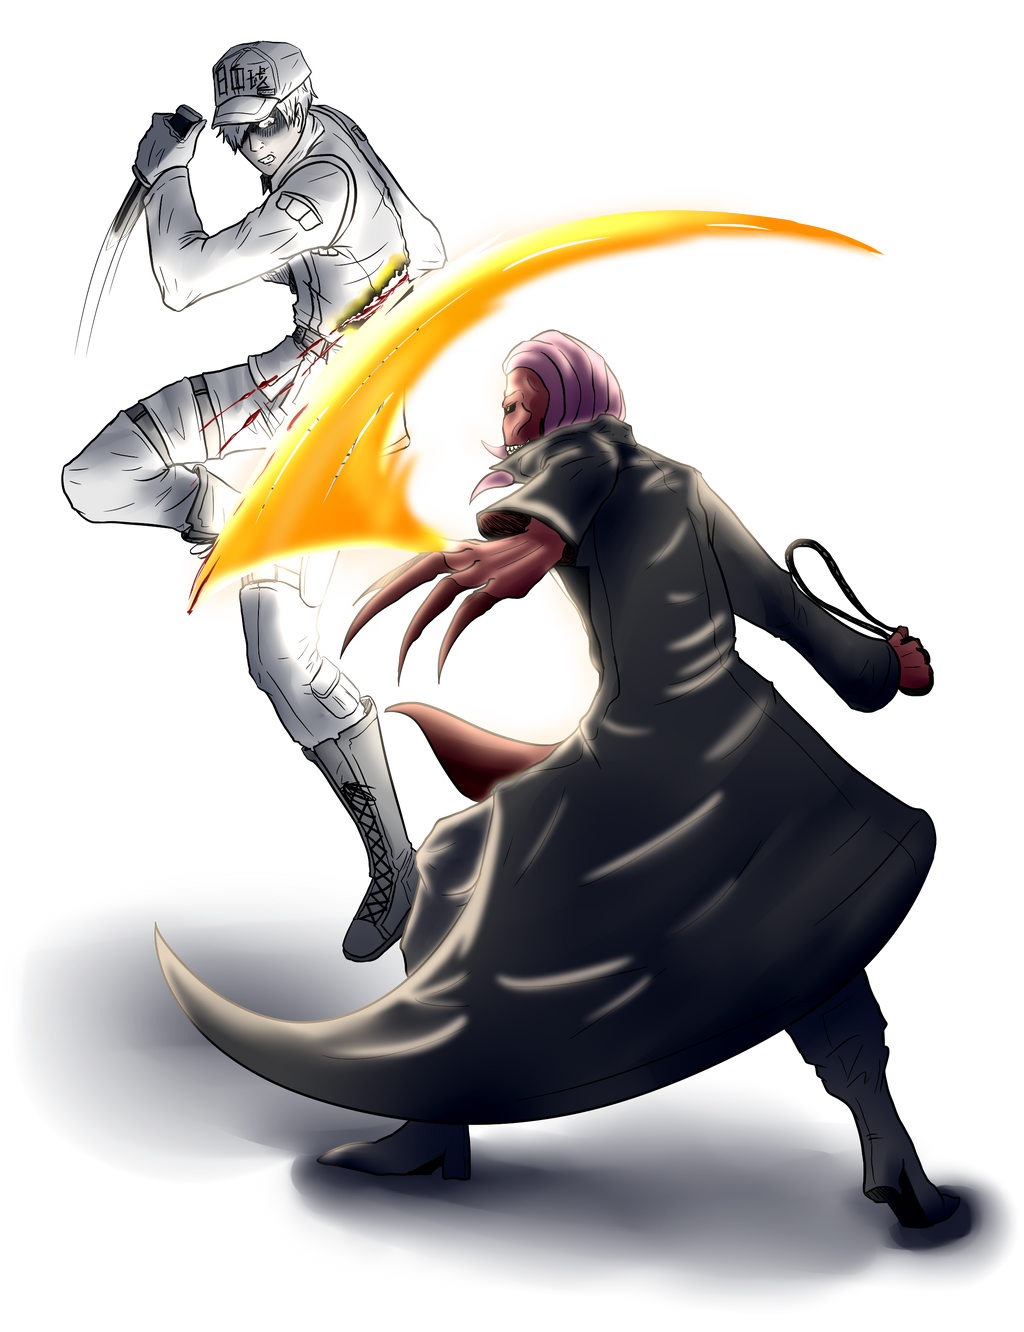 The Hell Clad Vasto Lorde by HezuNeutral on DeviantArt